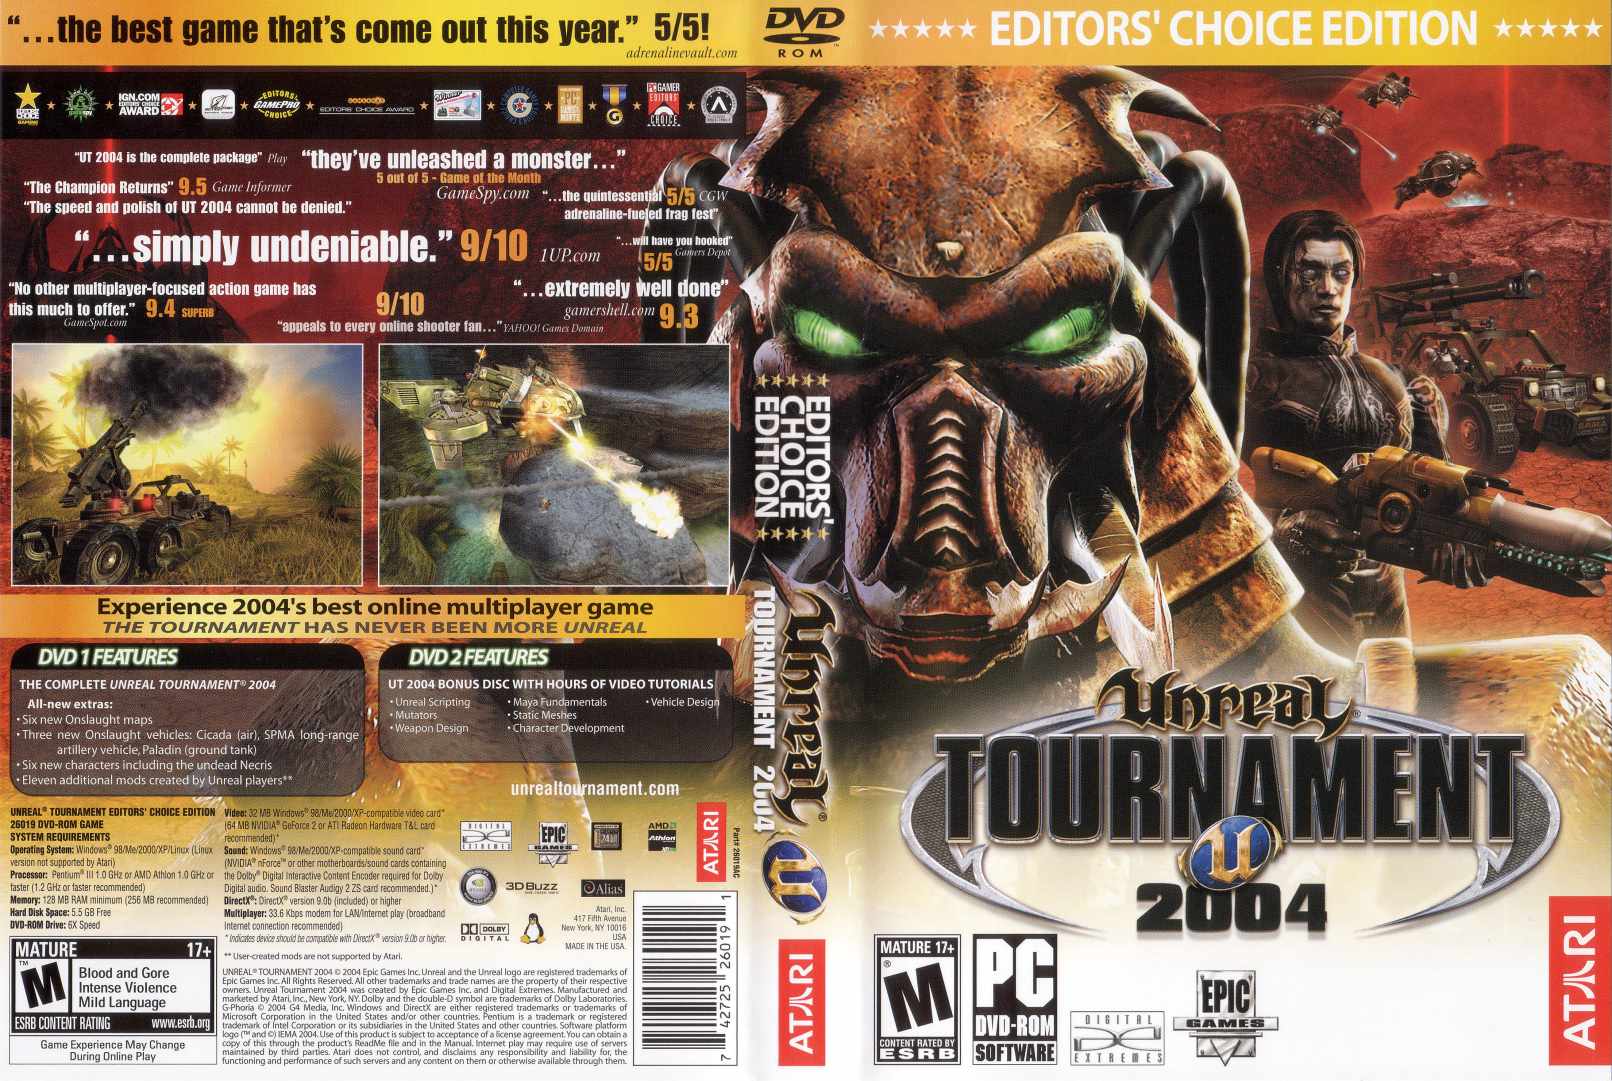 Unreal Tournament 2004: Editor's Choice Edition - DVD obal